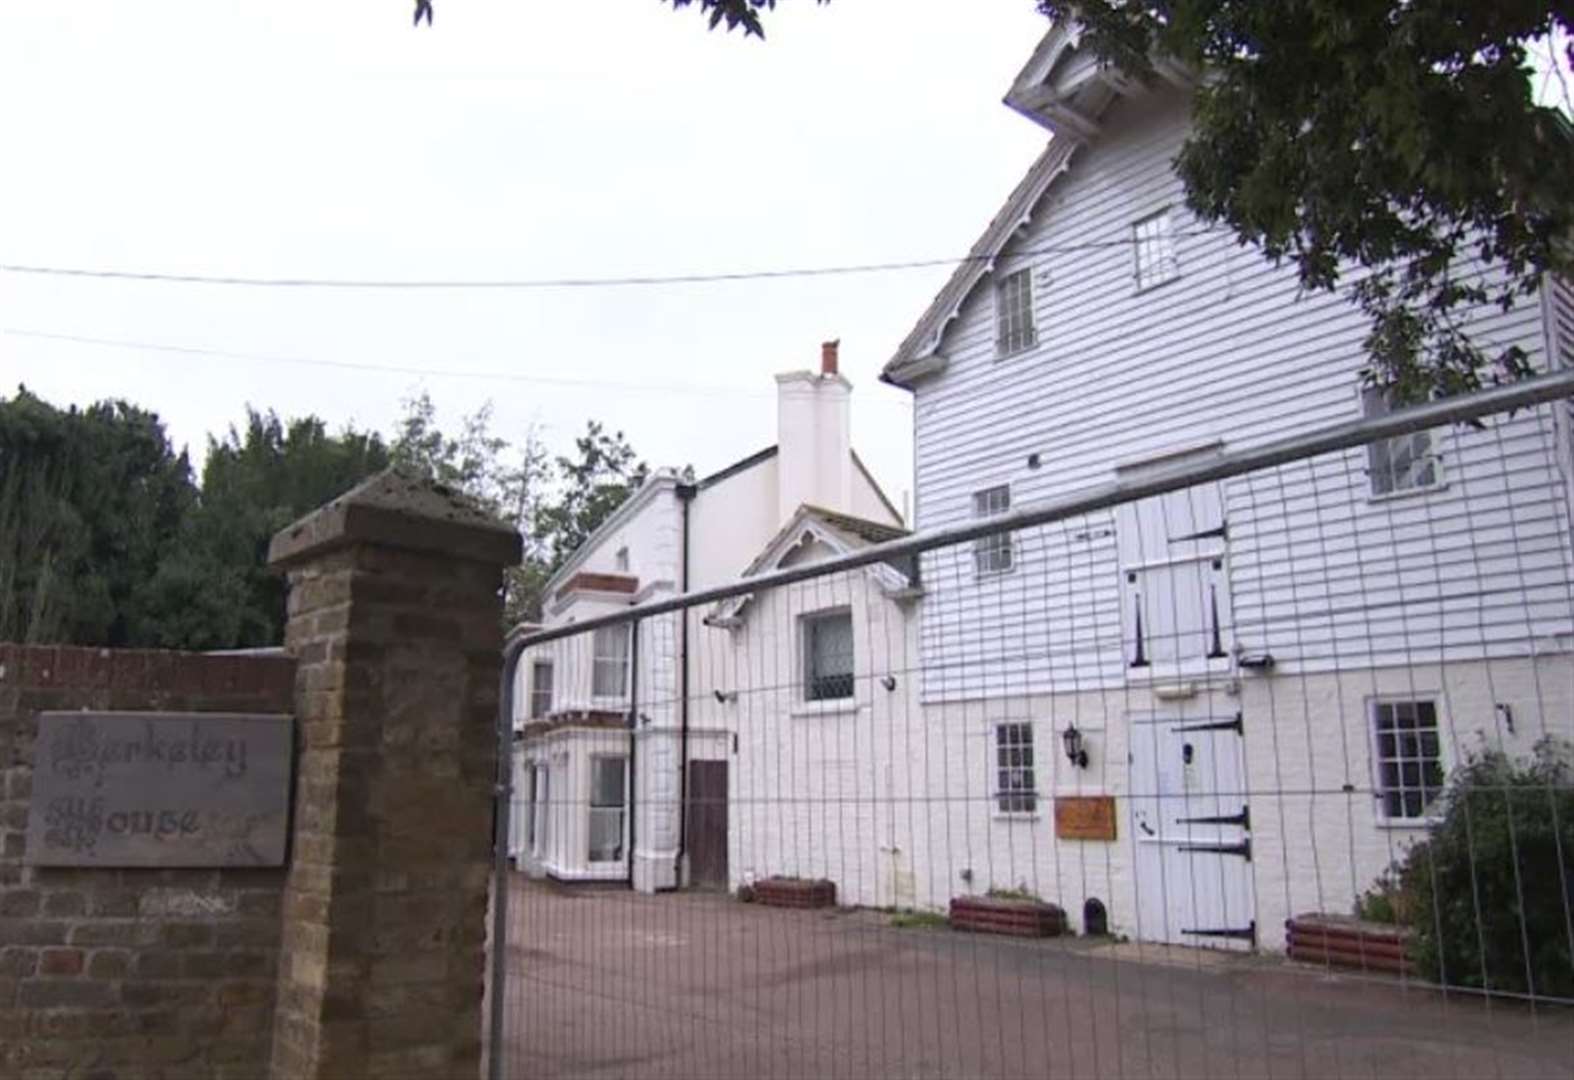 Residents in care home lived in 'appalling conditions' 